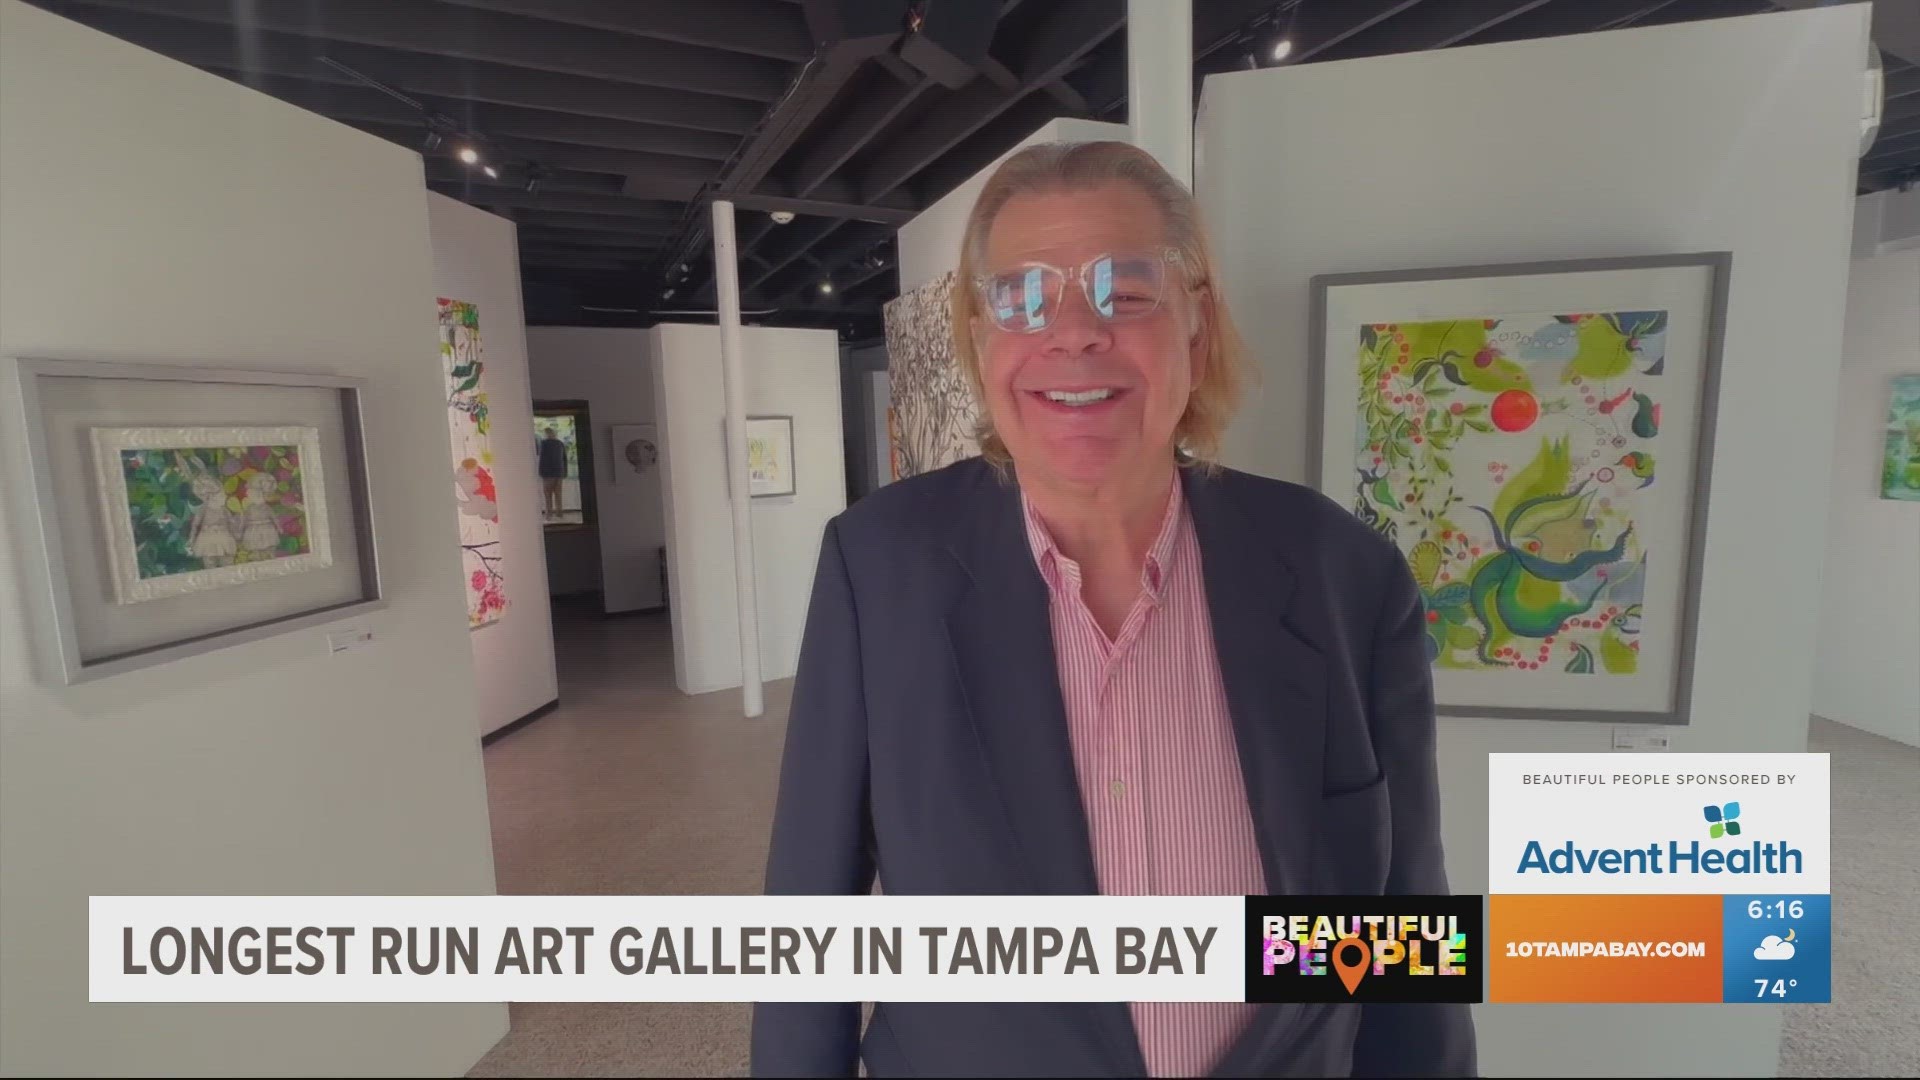 ​Today, we'd like you to meet Michael Murphy. He's the owner of the longest-running art gallery in Tampa, aptly named the Michael Murphy Gallery.